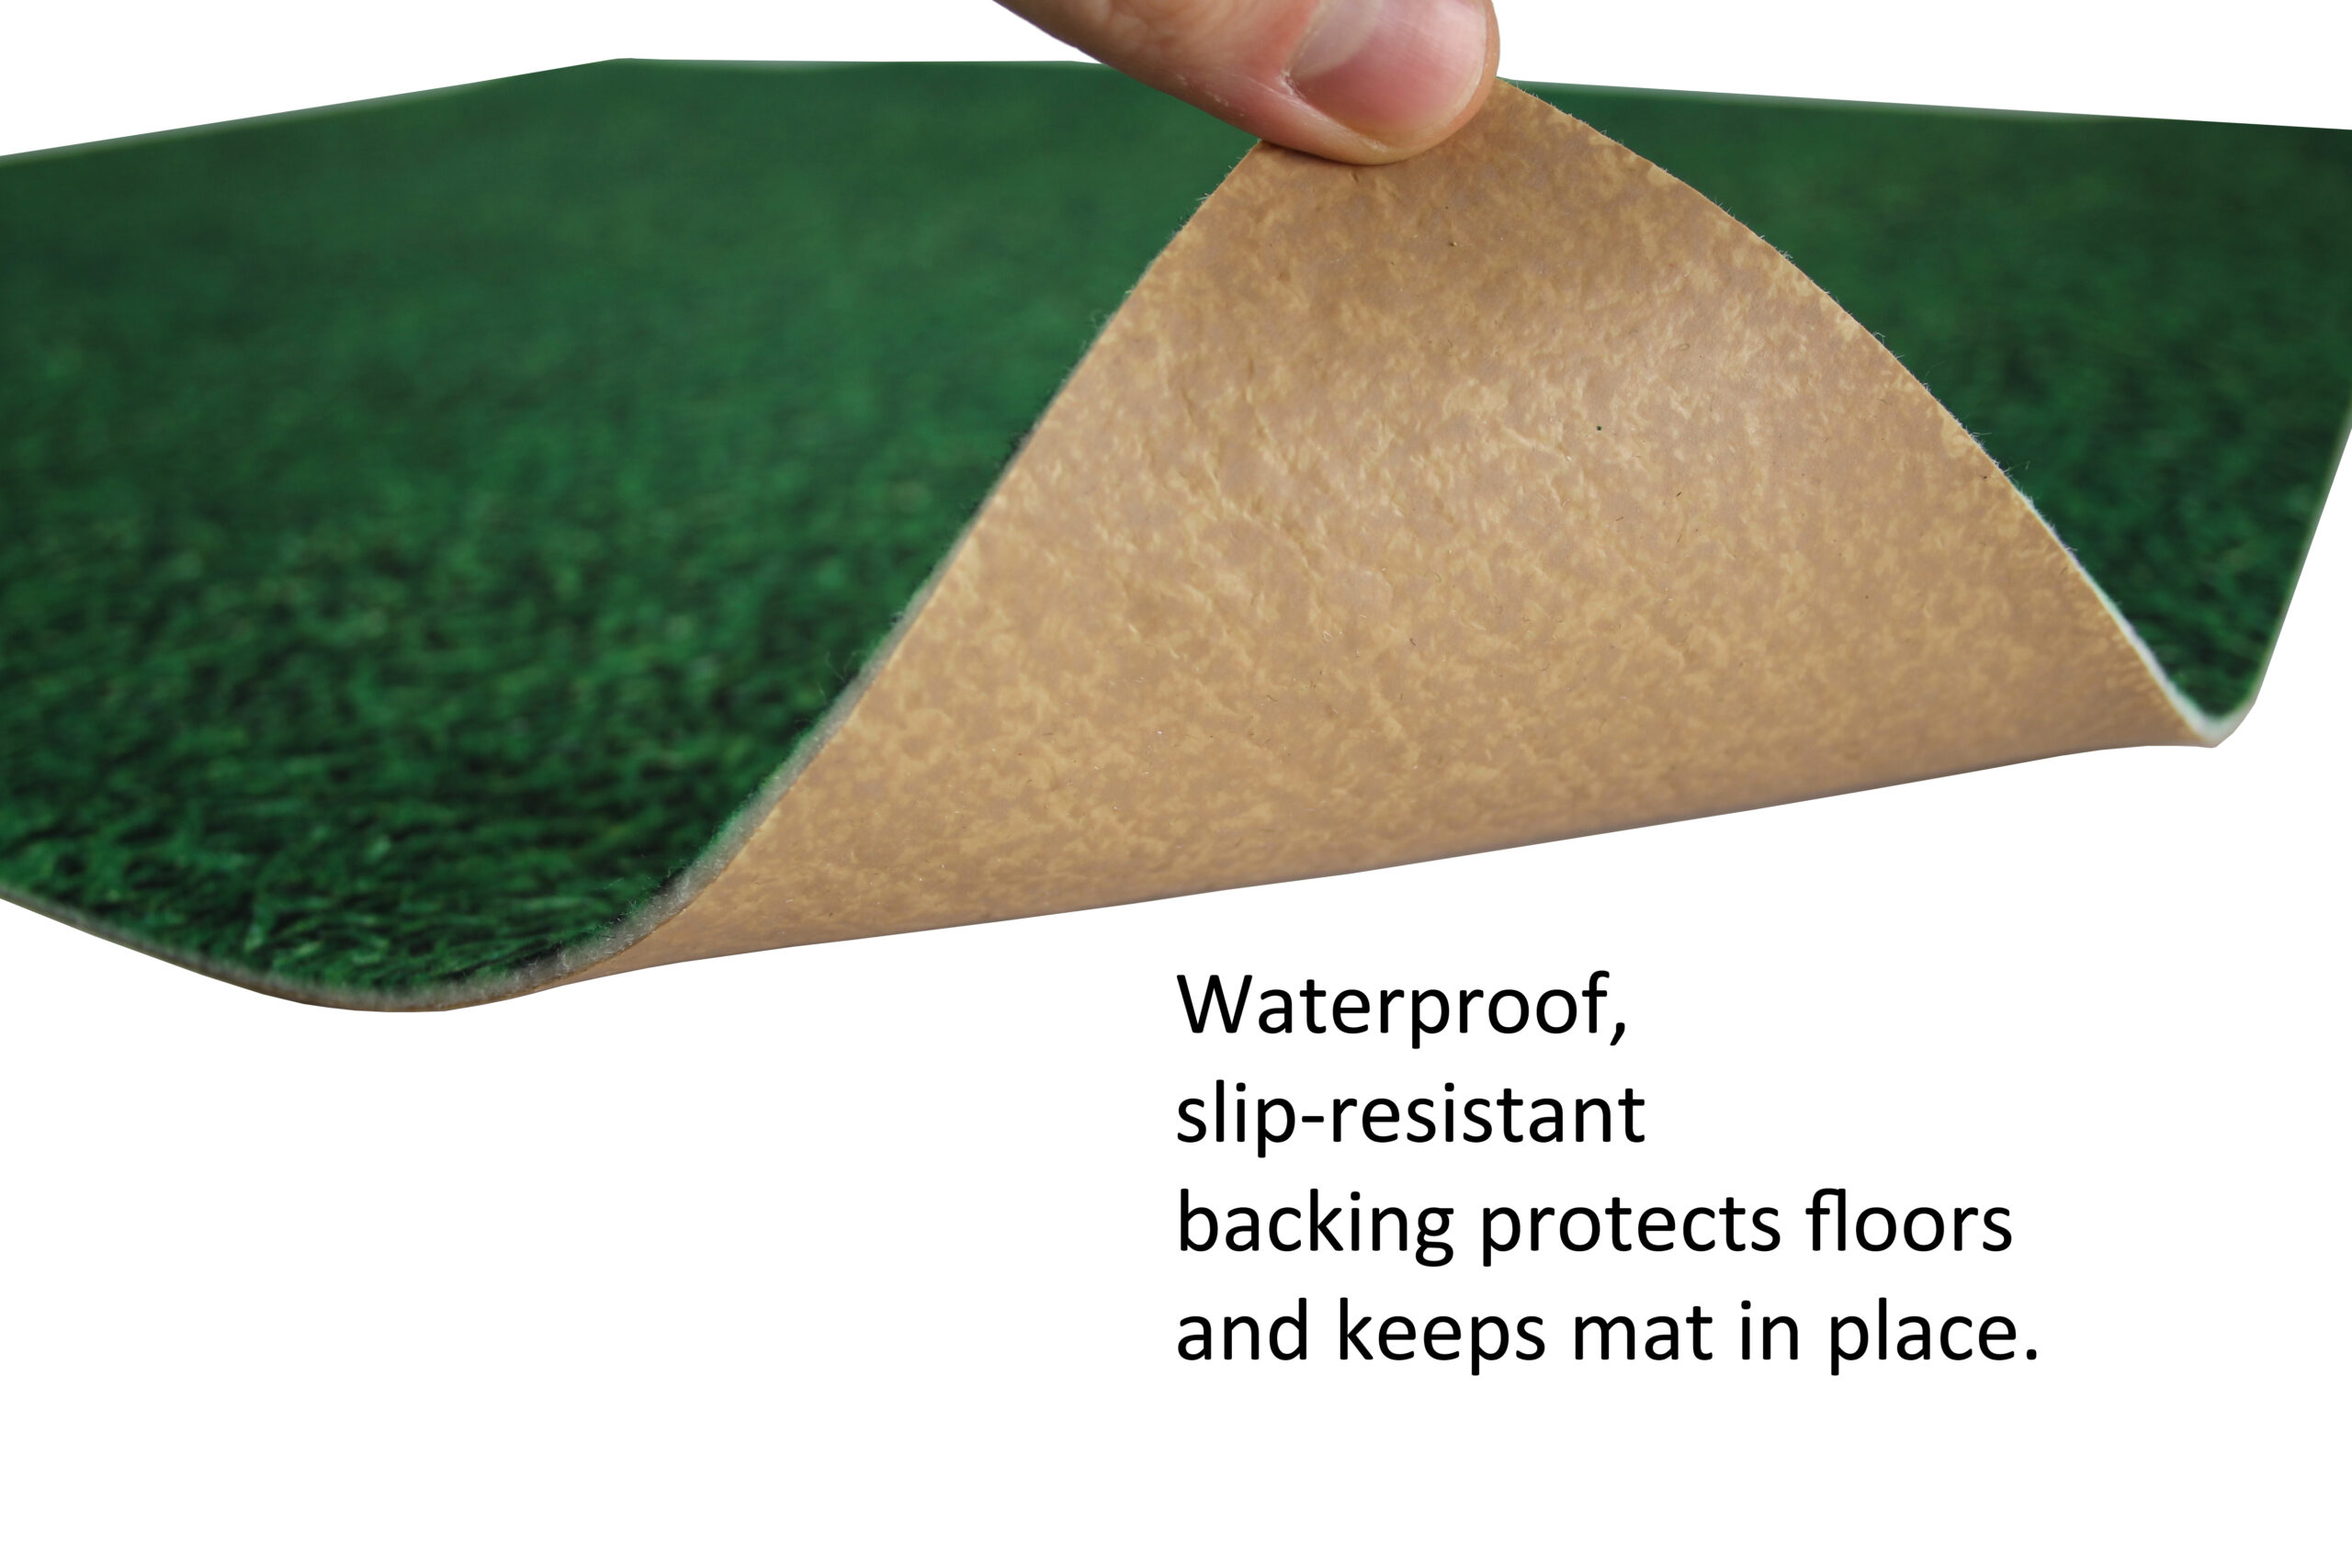 Drymate Potty Pad, Washable Puppy Training Mat, Absorbent Mat Contains  Liquids, Protects Floors, Washable/Reusable/Durable & Reviews